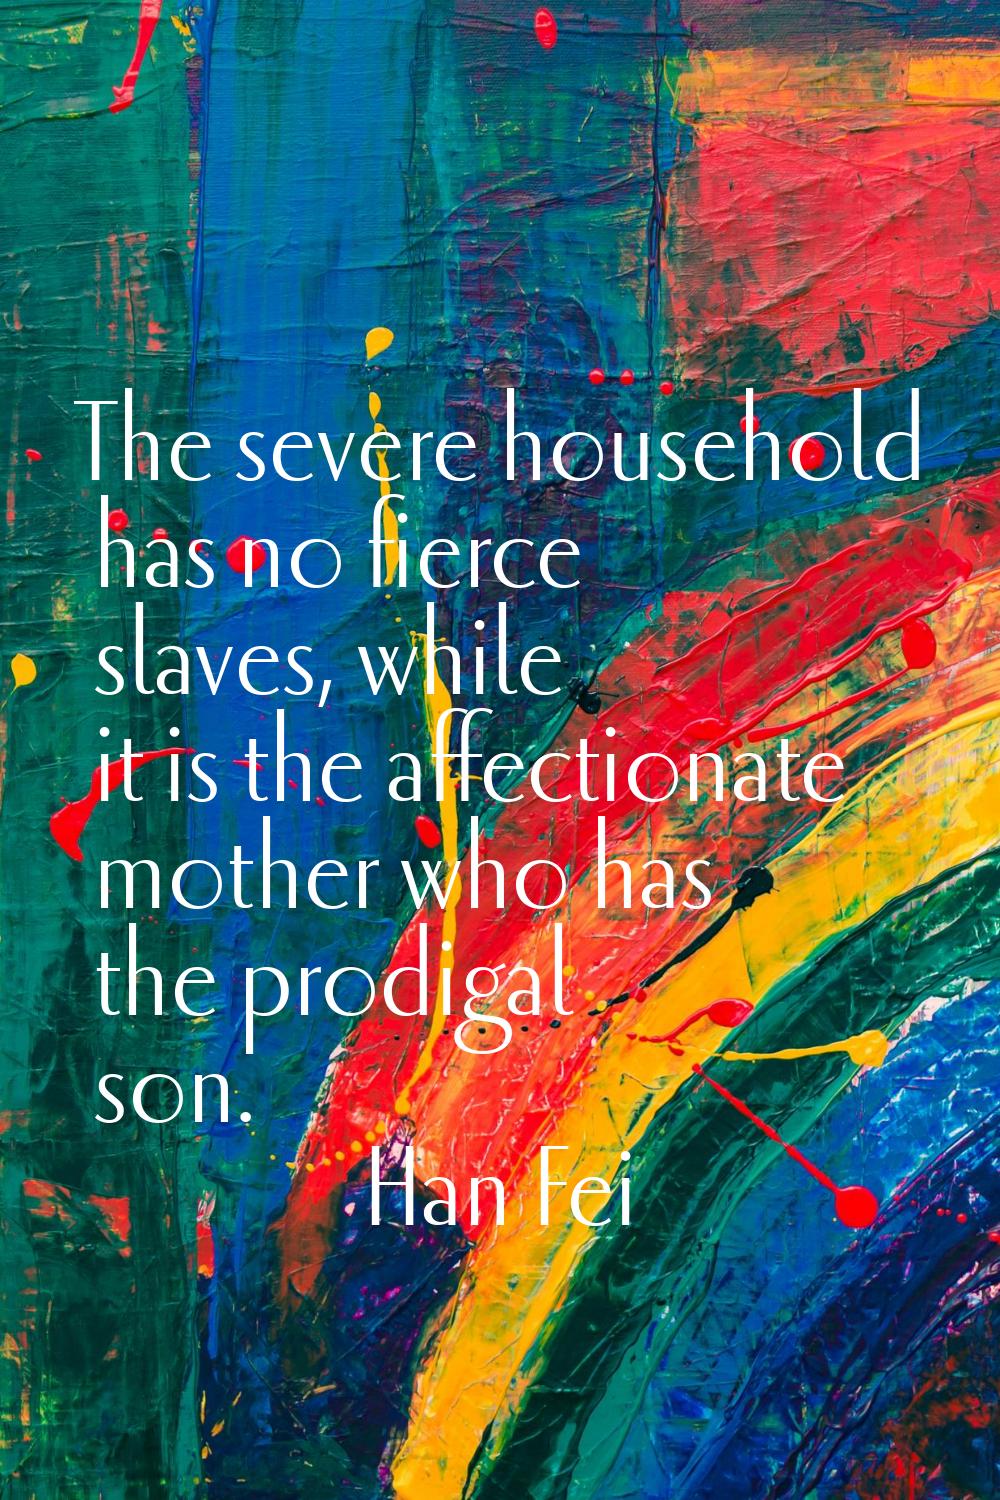 The severe household has no fierce slaves, while it is the affectionate mother who has the prodigal